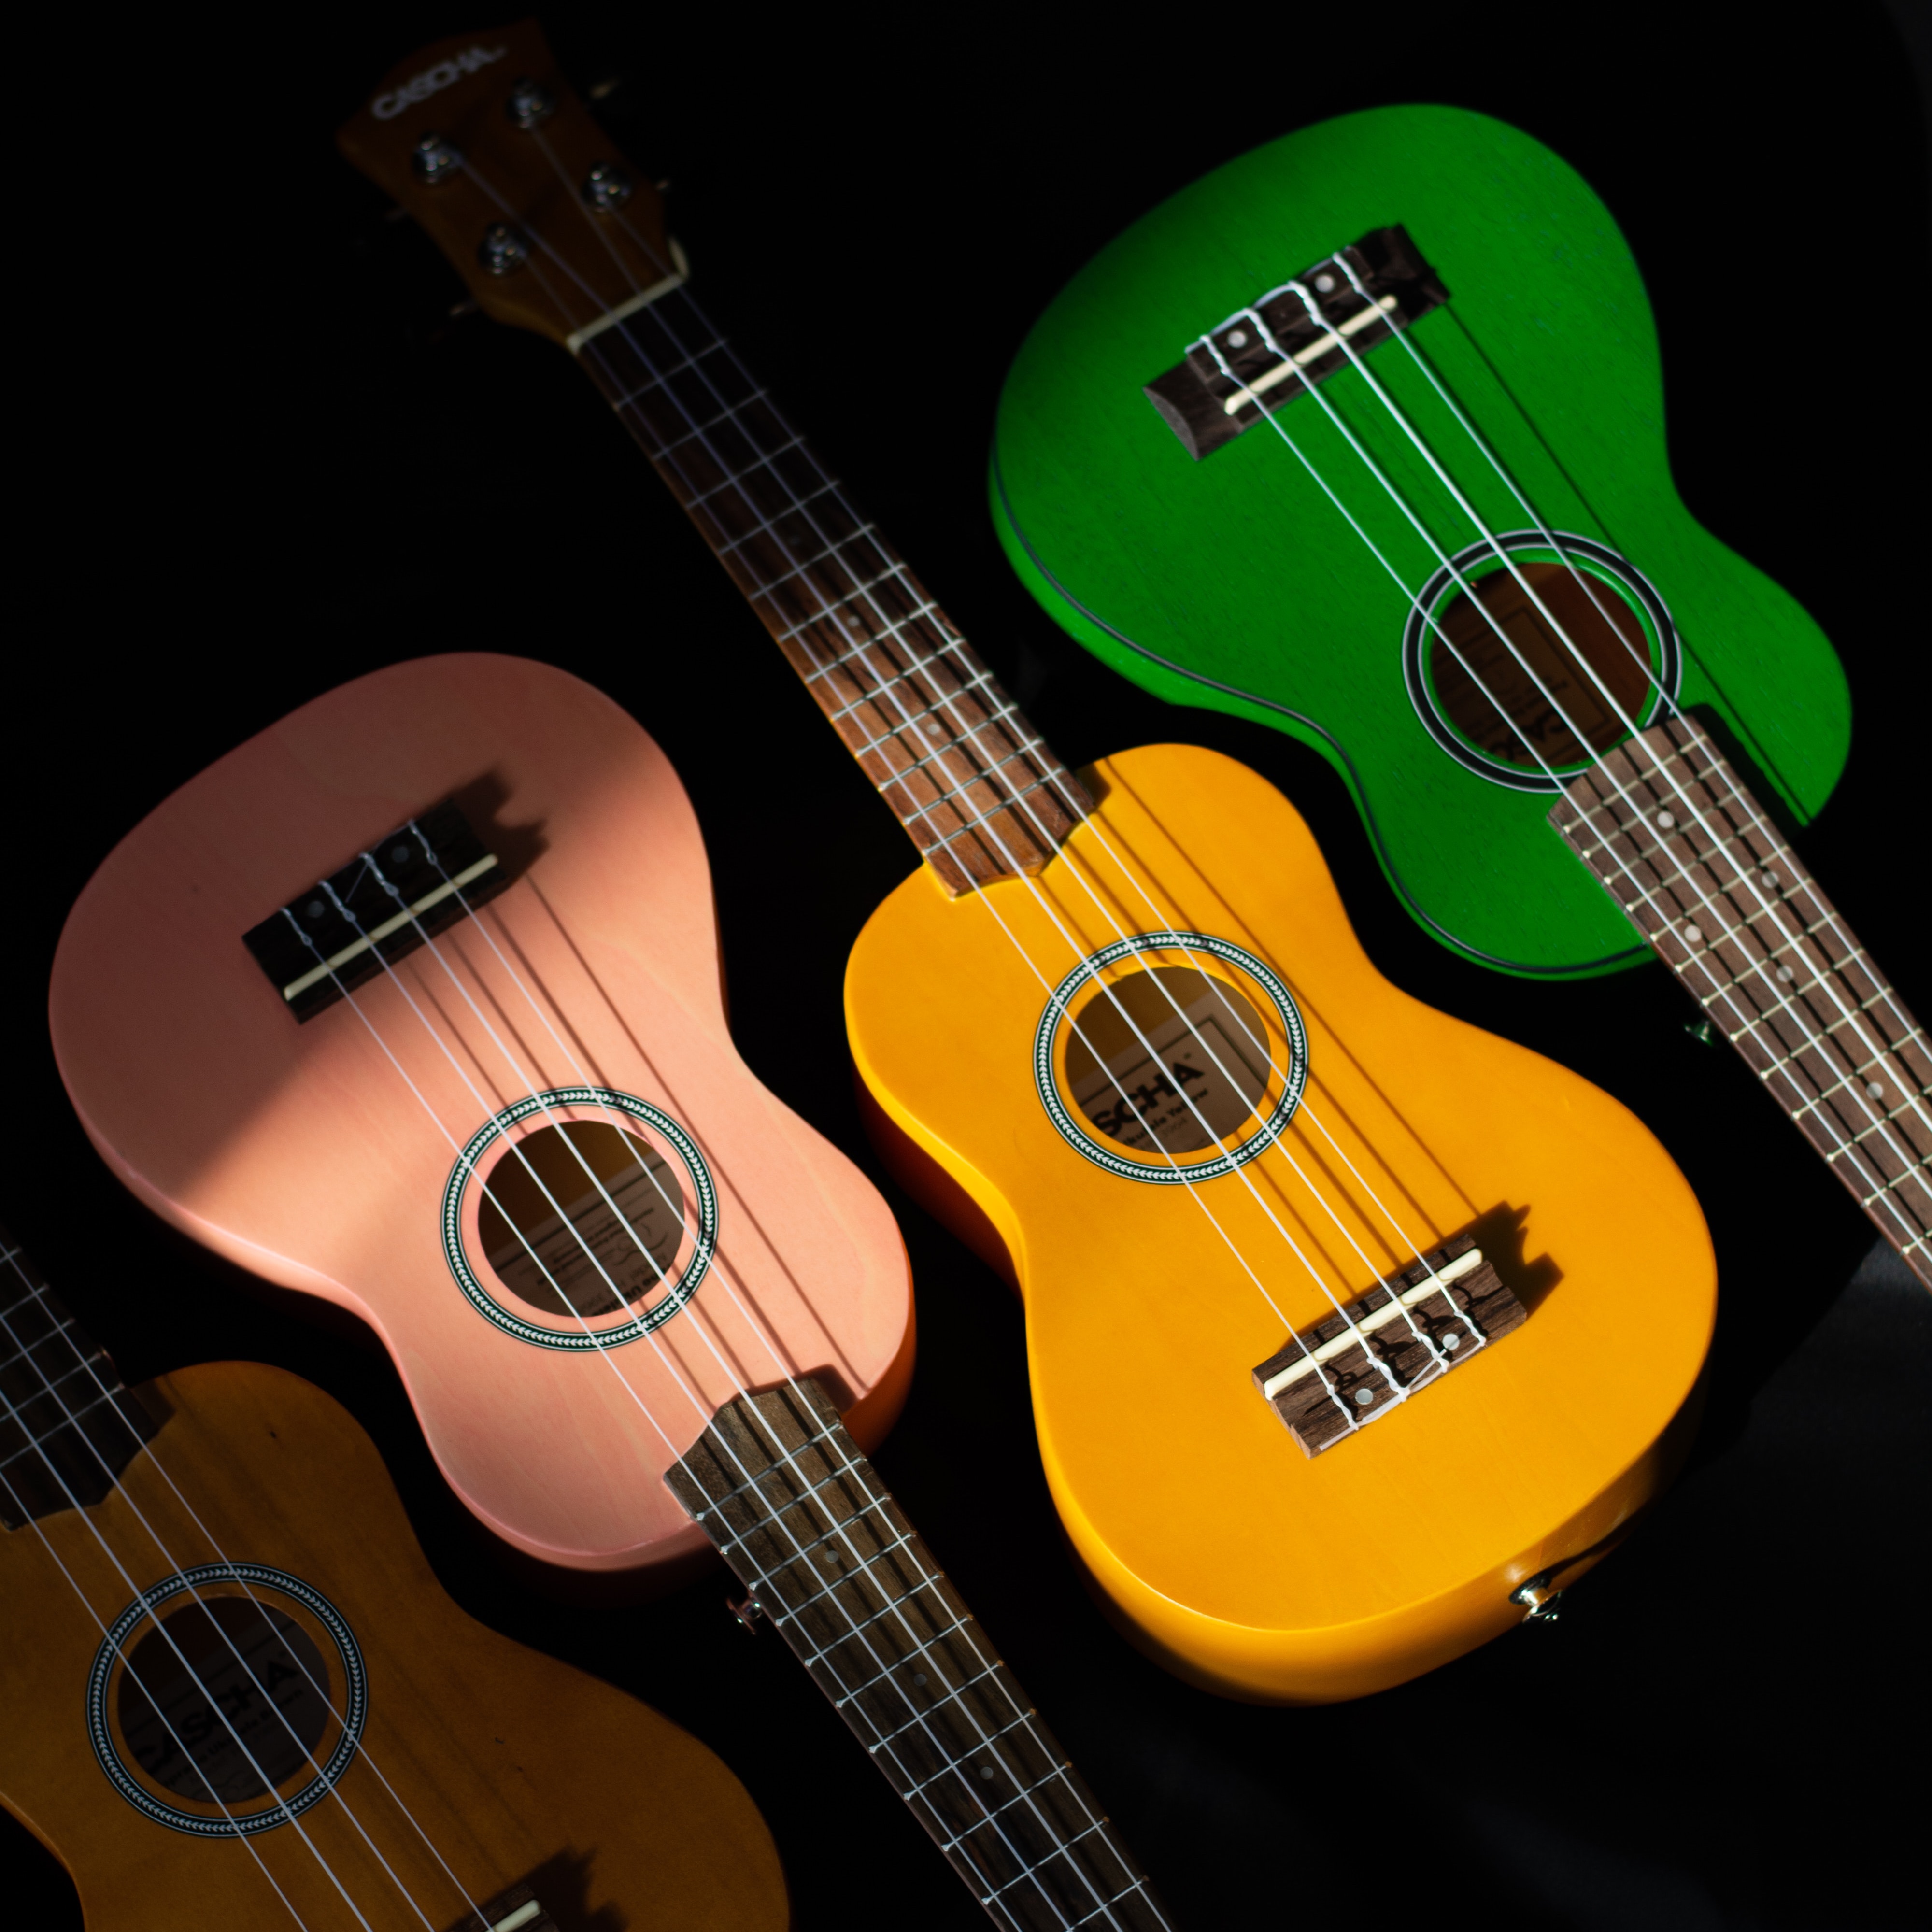 Three ukuleles in a row. one pink, one yellow, one green